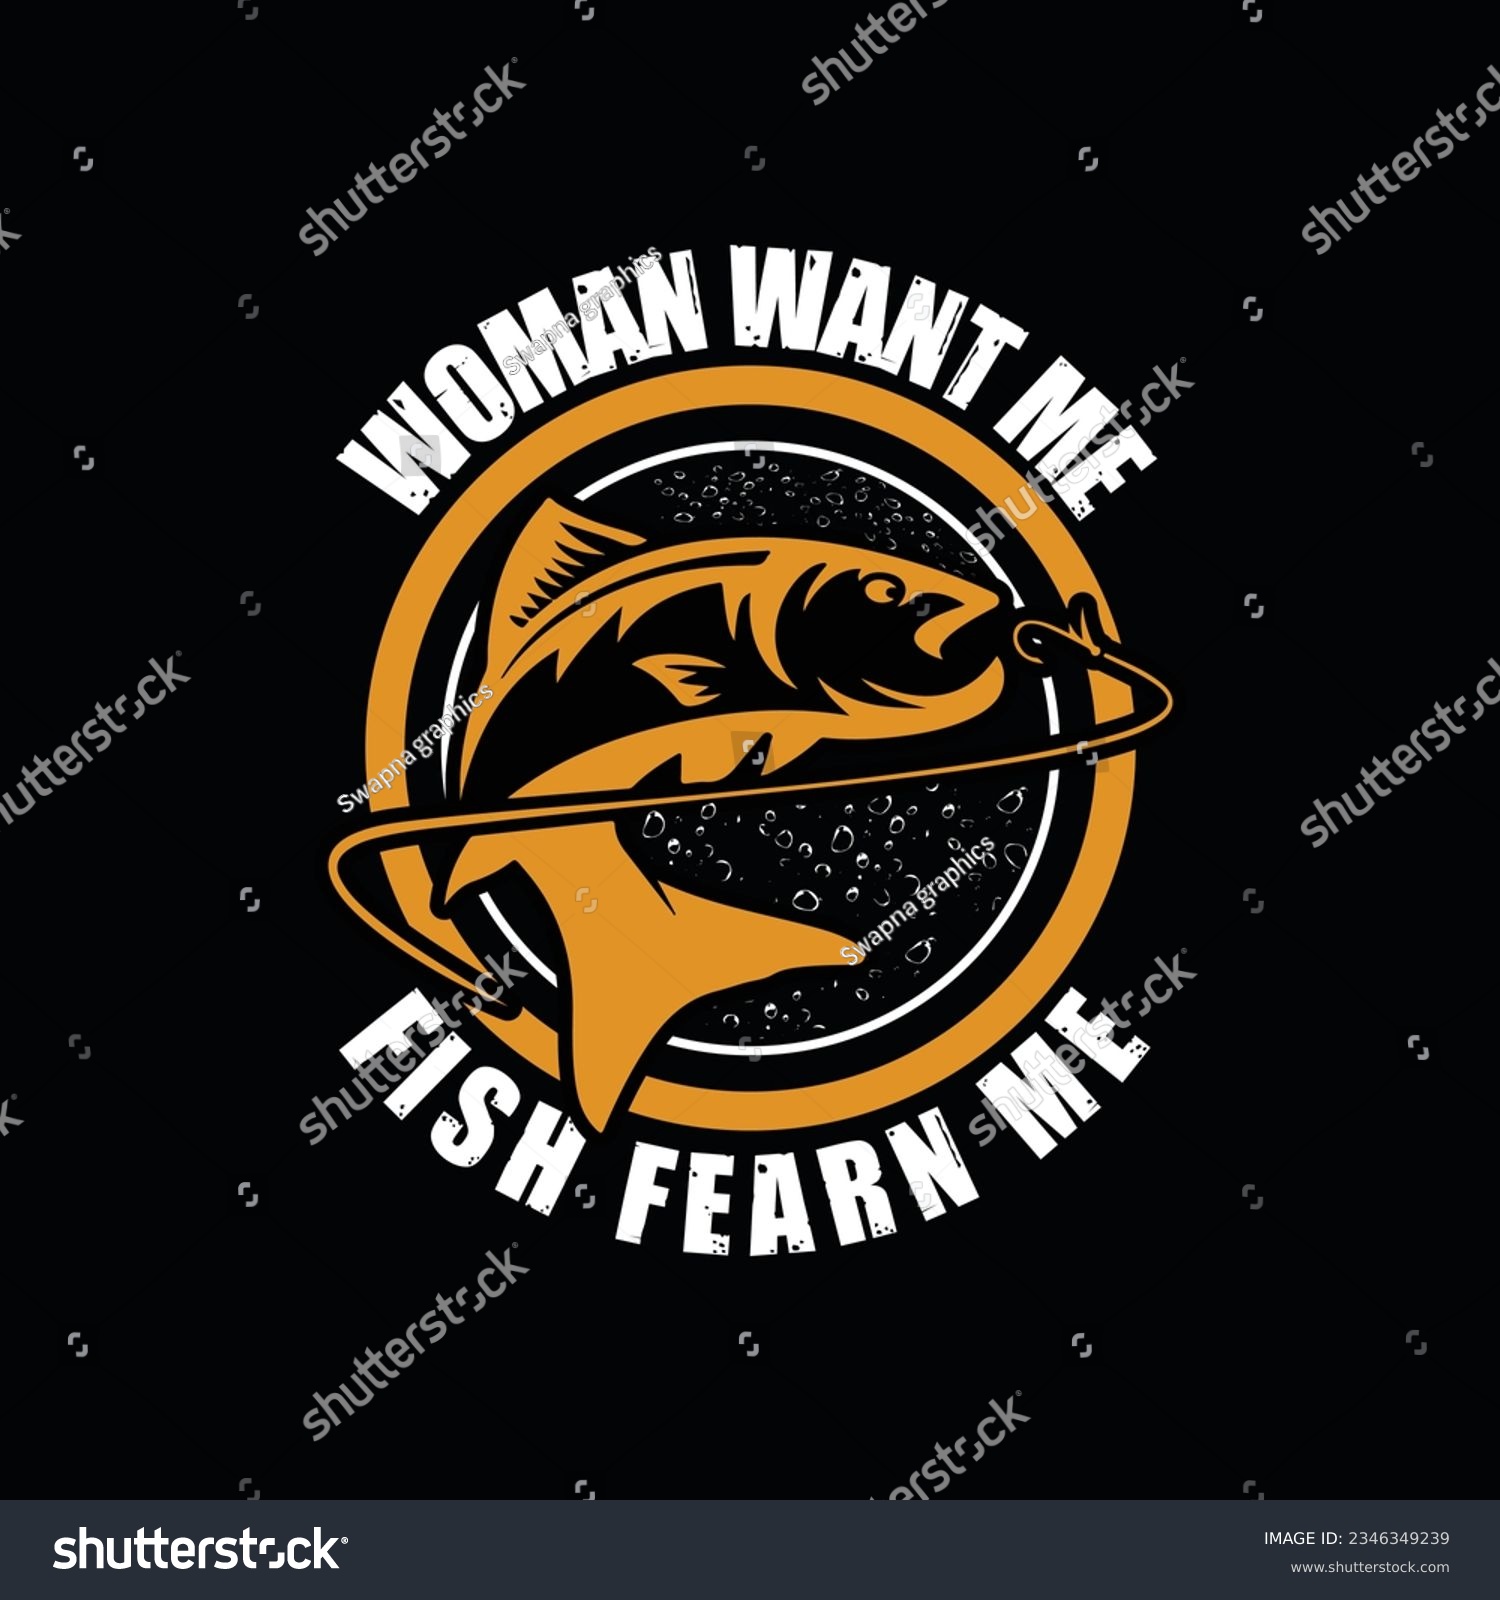 SVG of WOMAN WANT ME FISH FEARN ME, CREATIVE FISHING T SHIRT DESIGN svg